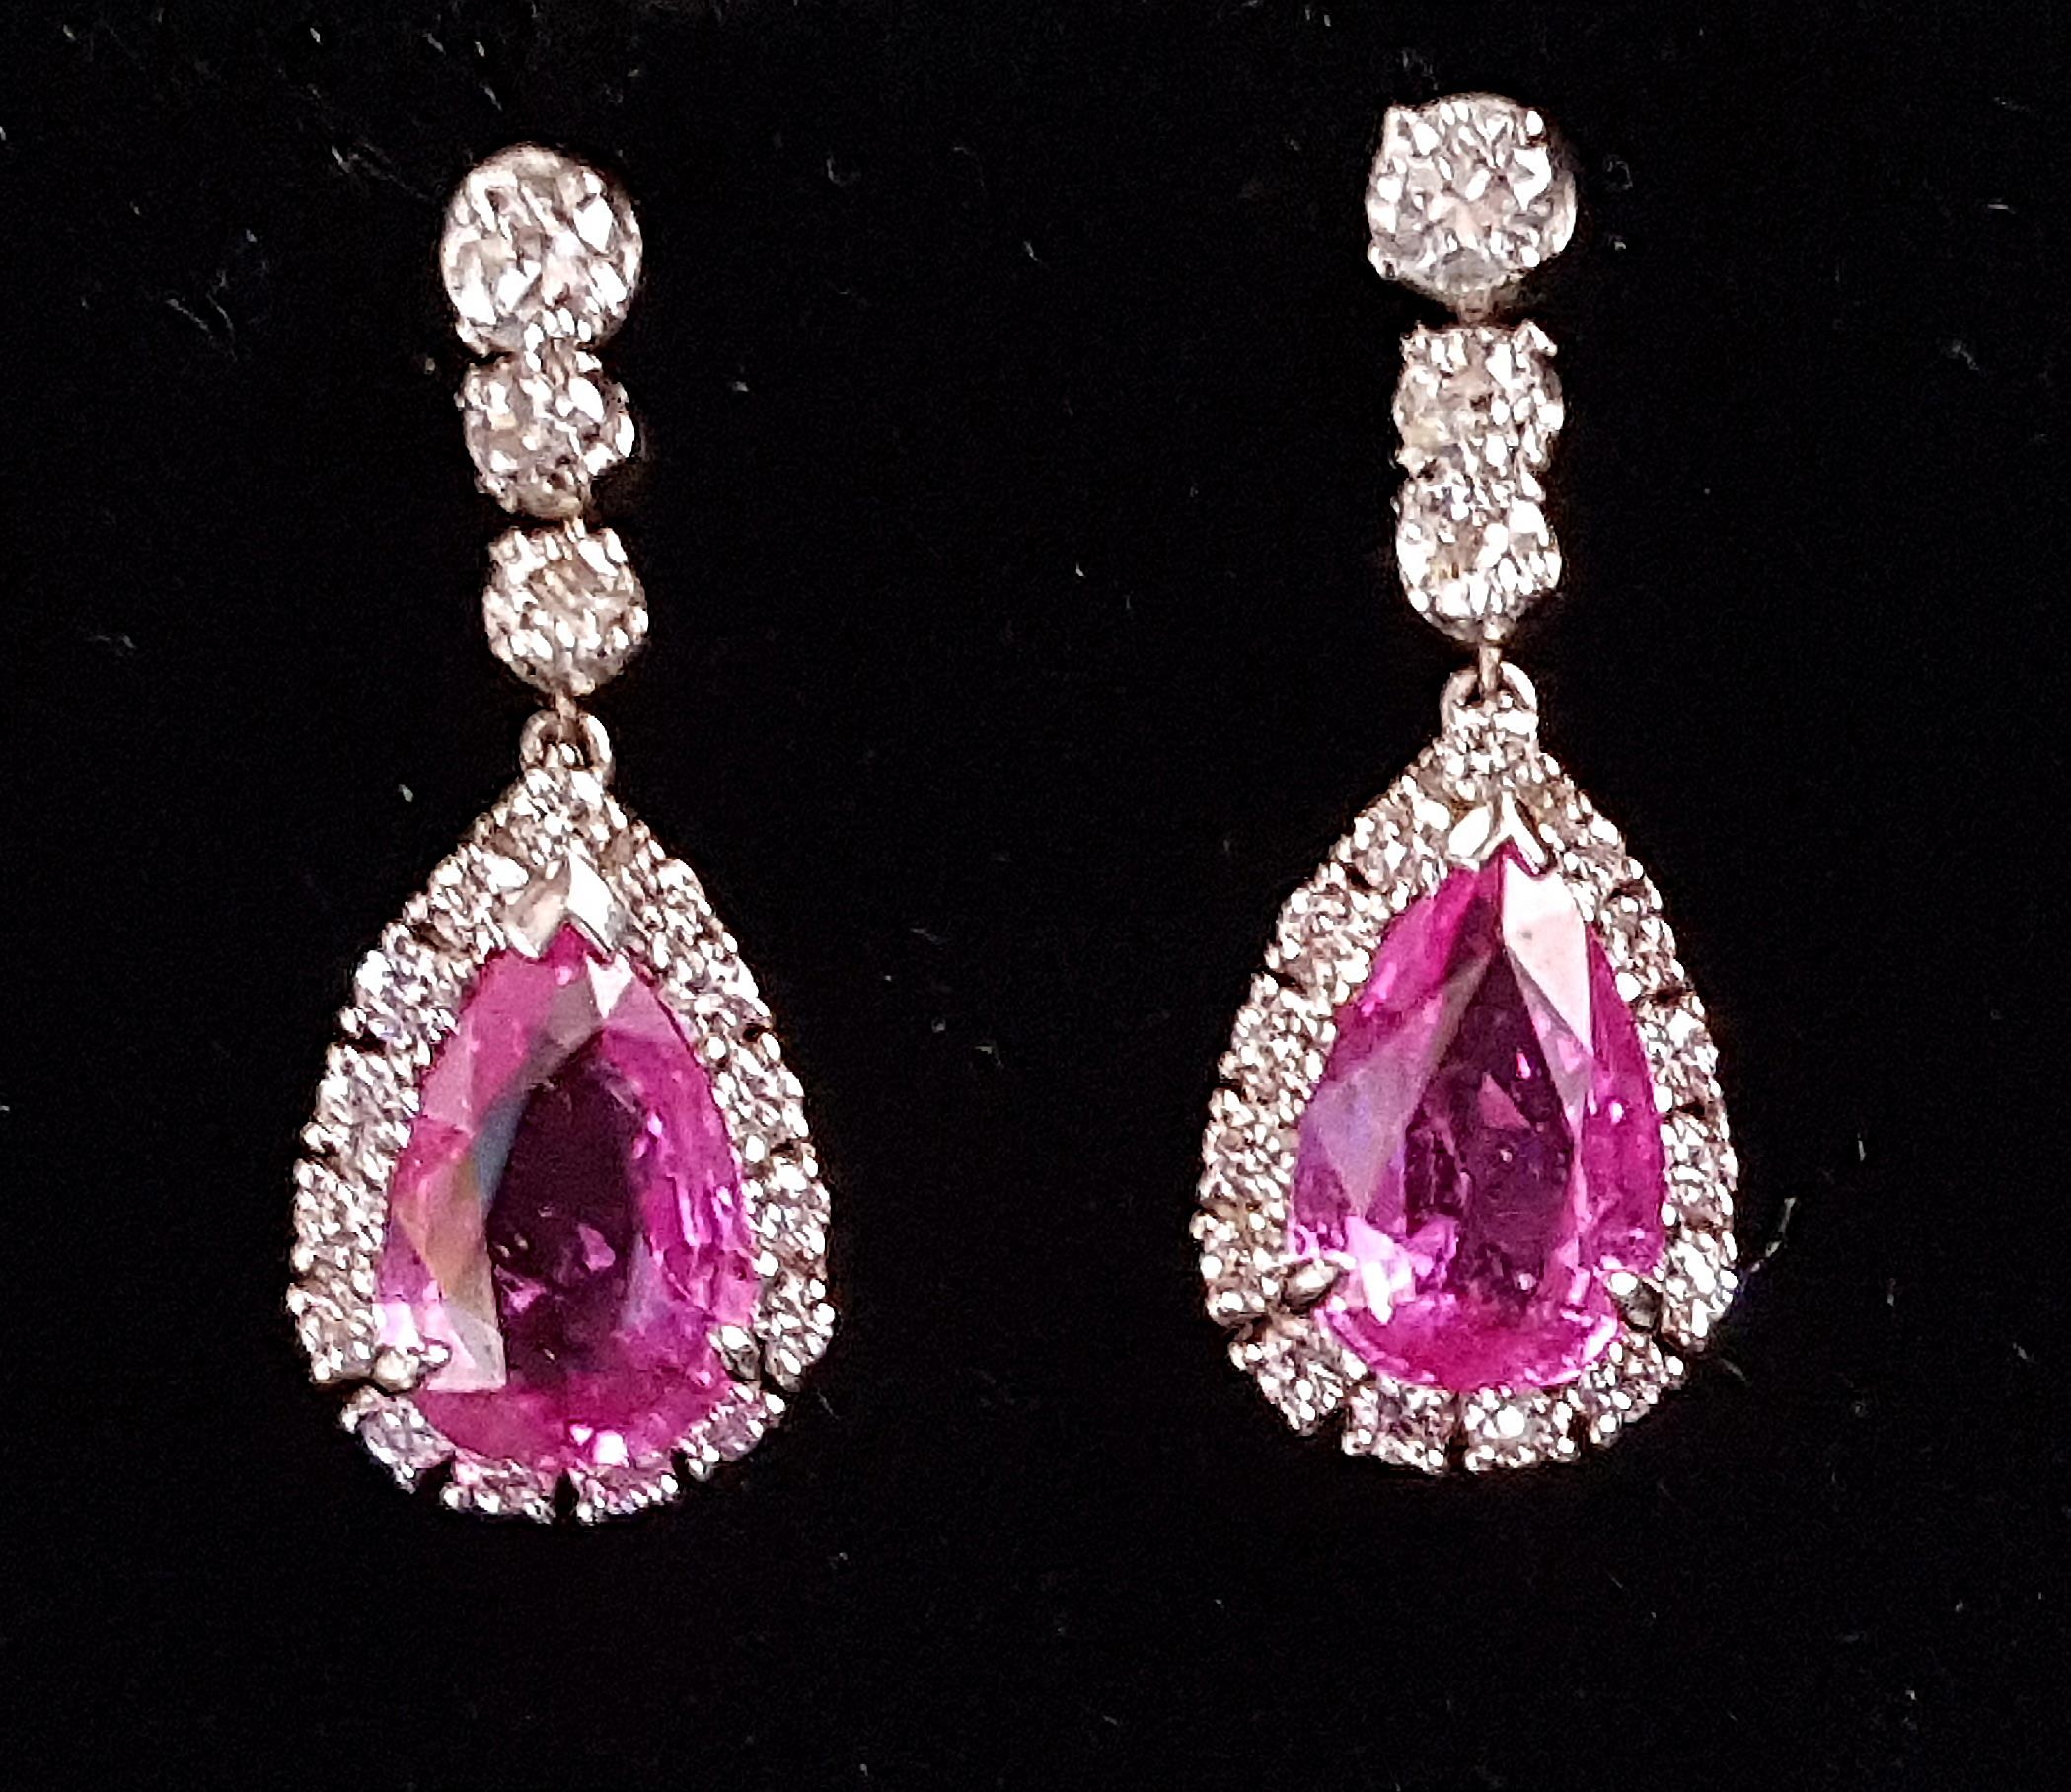 PAIR OF PINK TOPAZ AND DIAMOND DROP EARRINGS the central pear cut pink topaz on each approximately